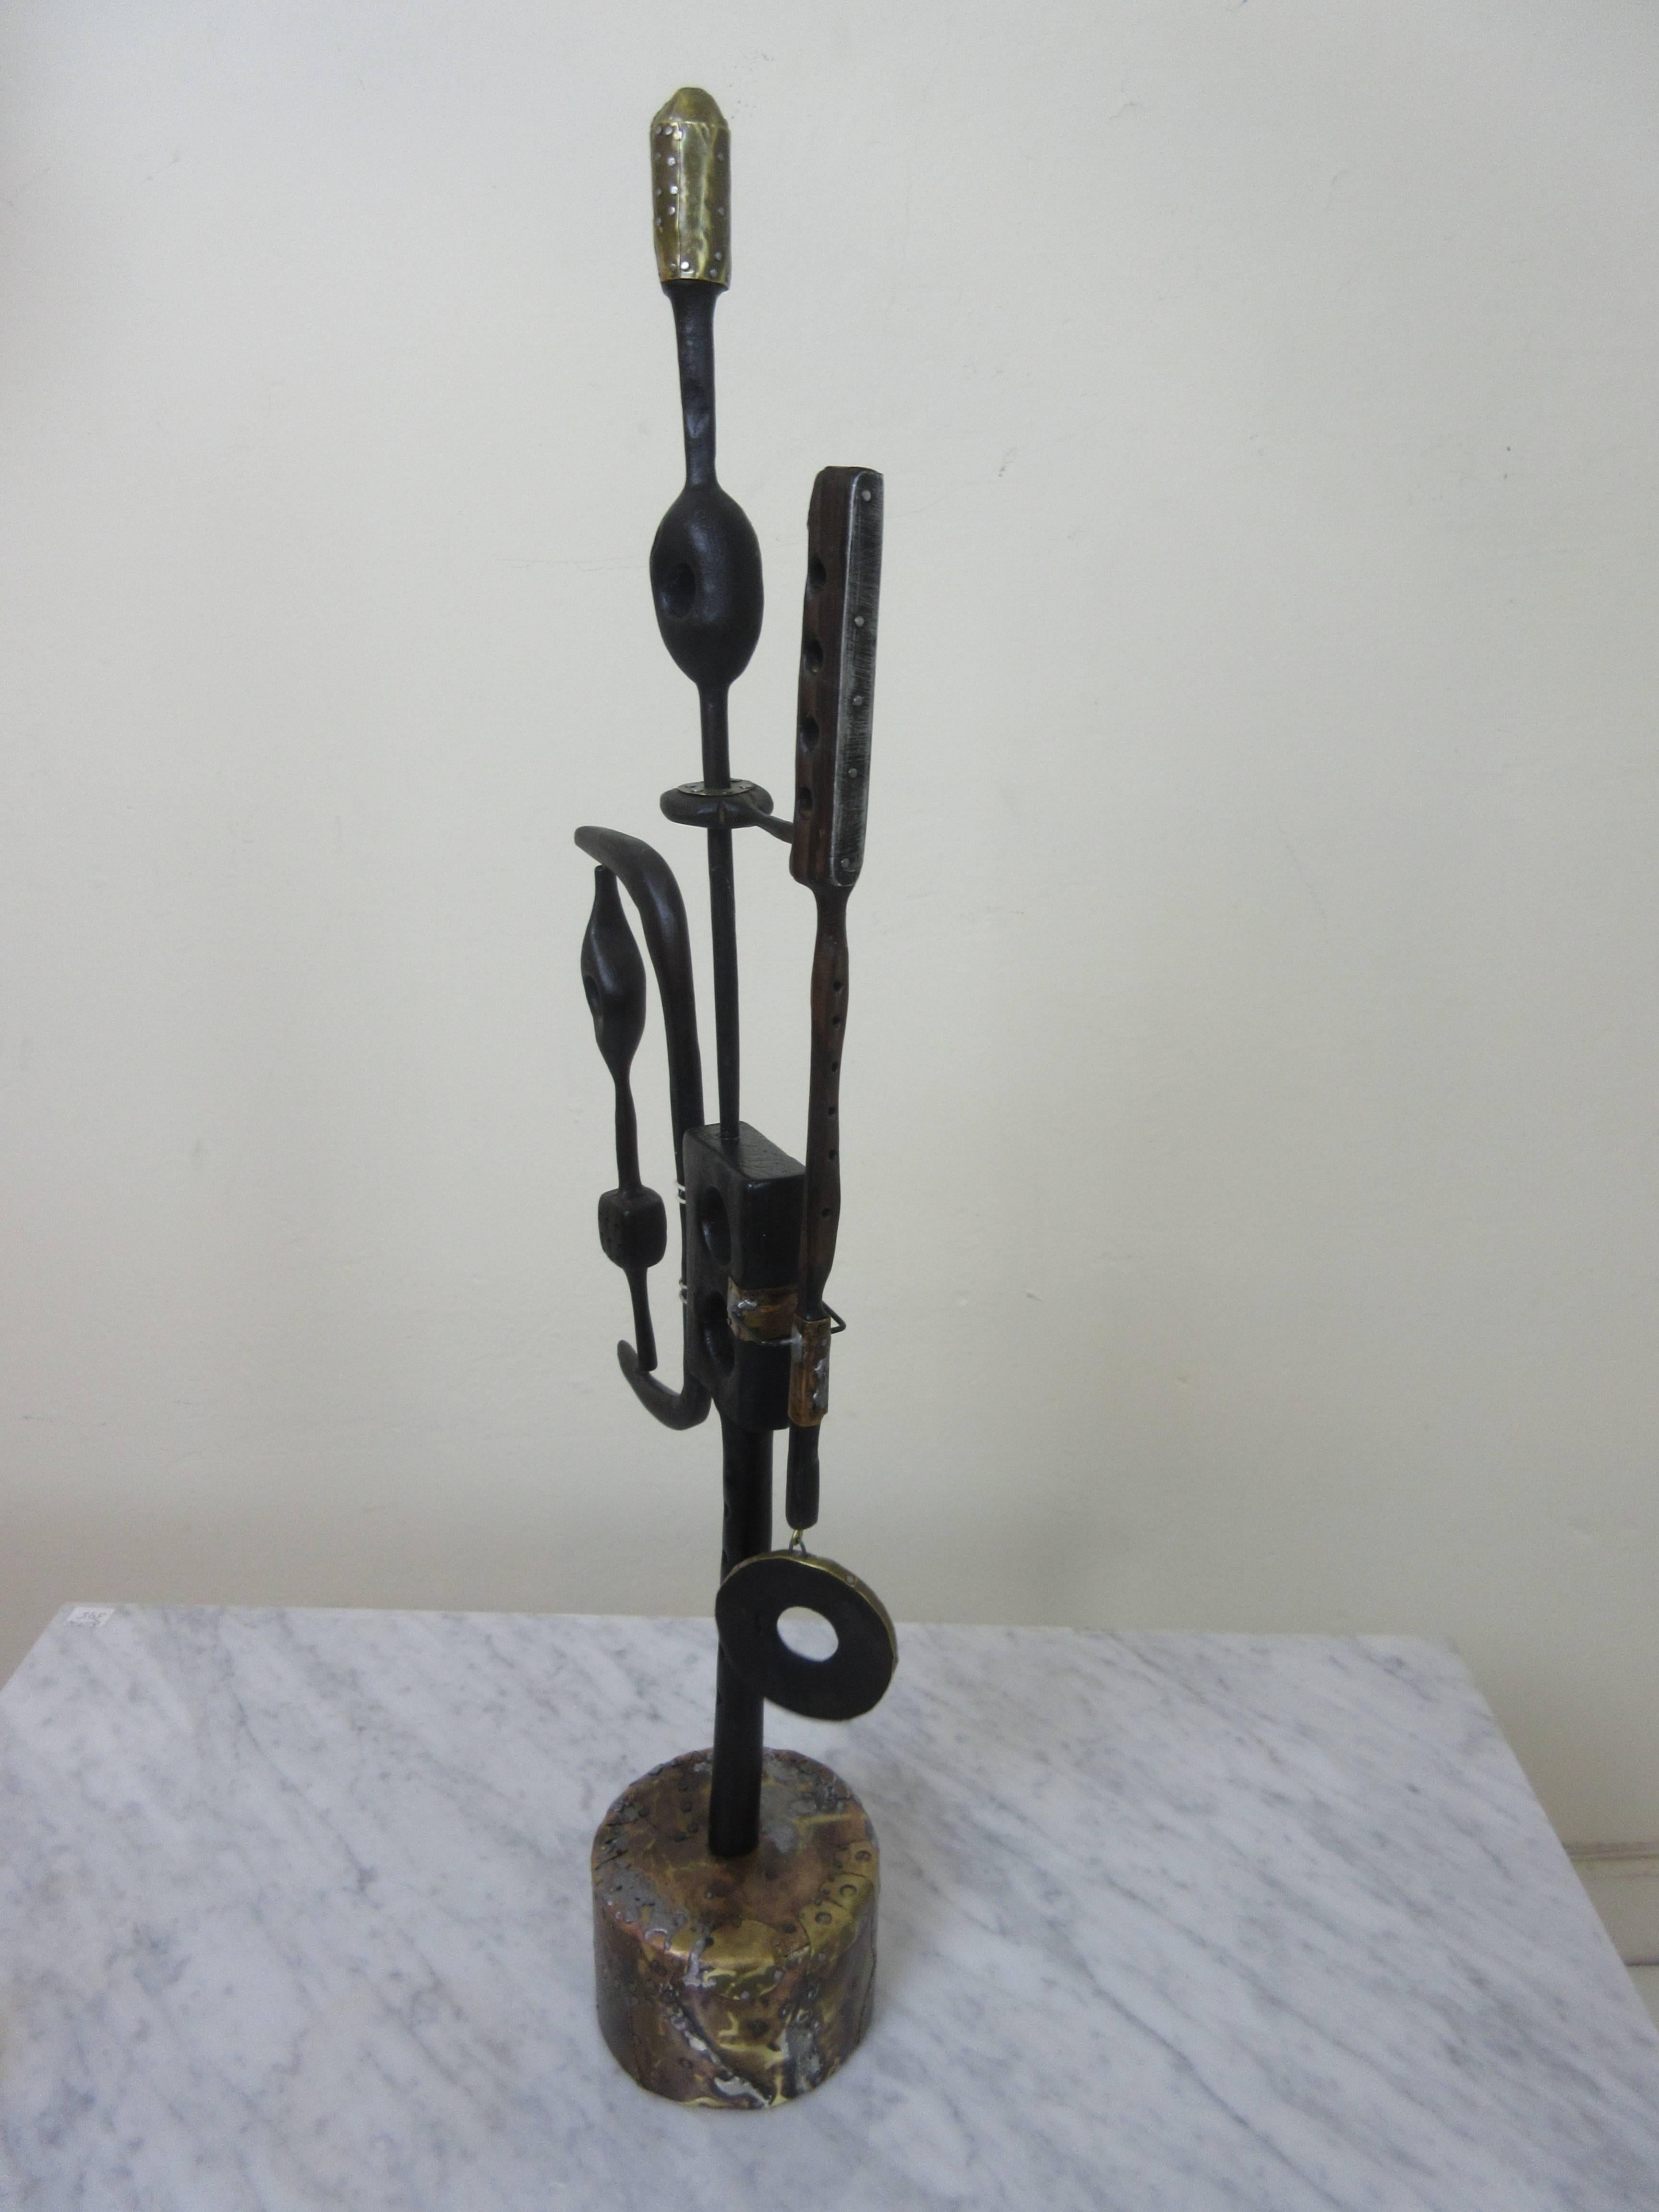 Adam Henderson sculpture limelight, 2016. Adam's Limelight channels a Tribal Primitivism vibe and is made of wood and nailed sheet metal with a bronzed patina. Commissions are welcome is you have size, color and material requirements.